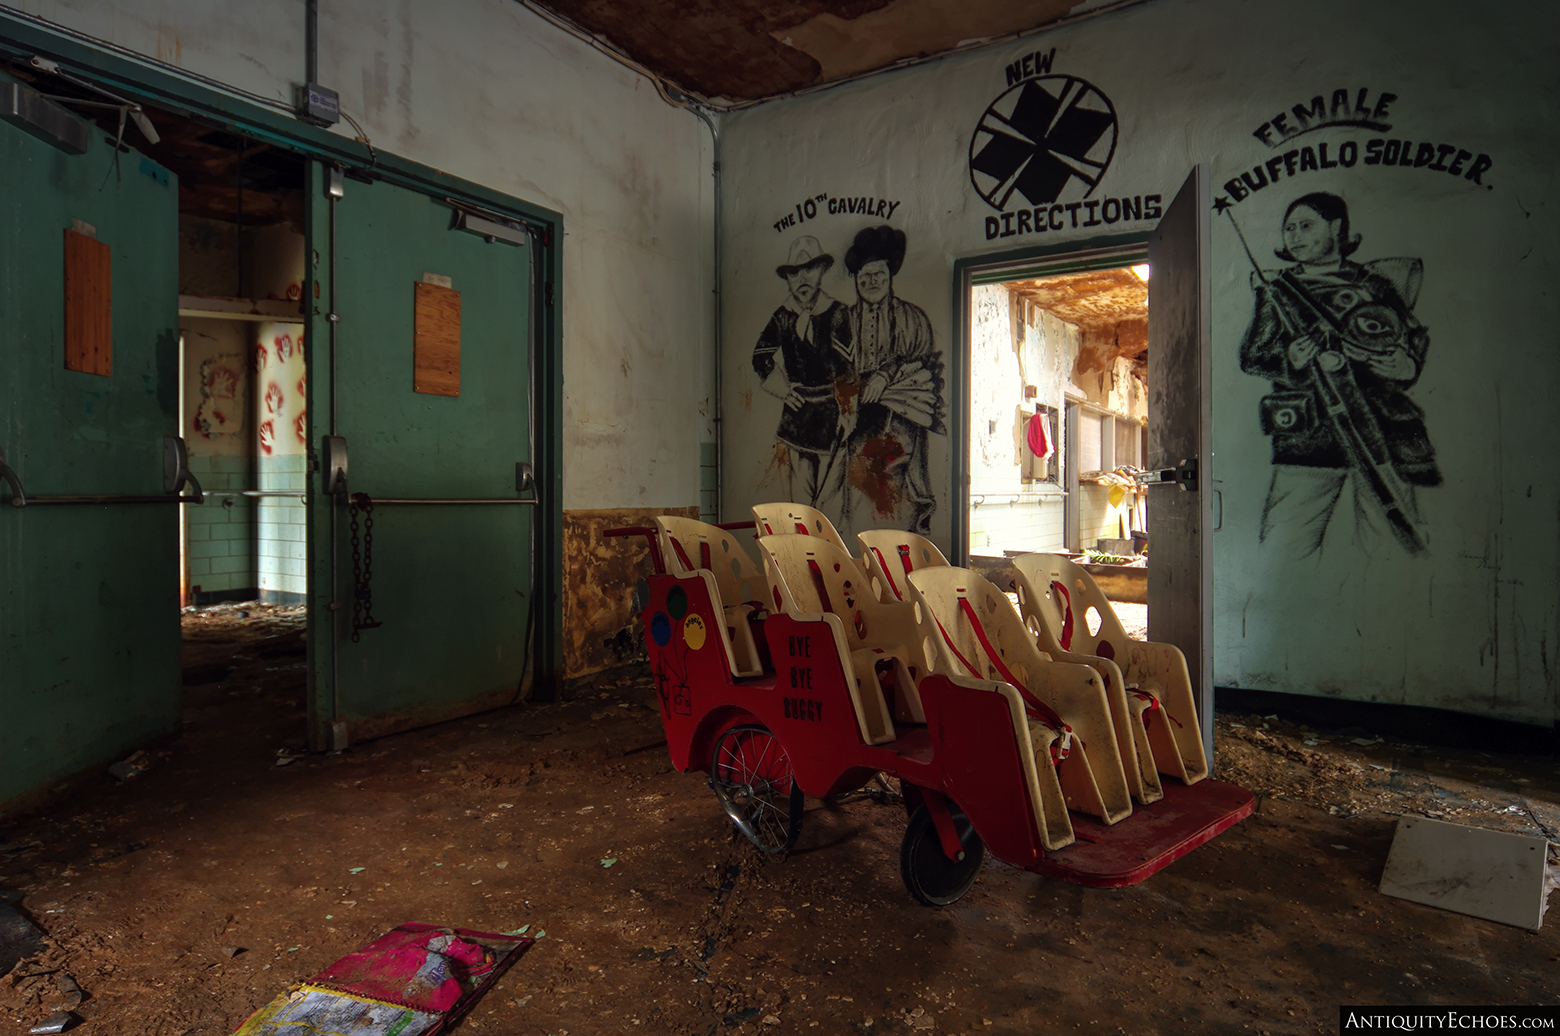 Embreeville State Hospital - Murals and debris